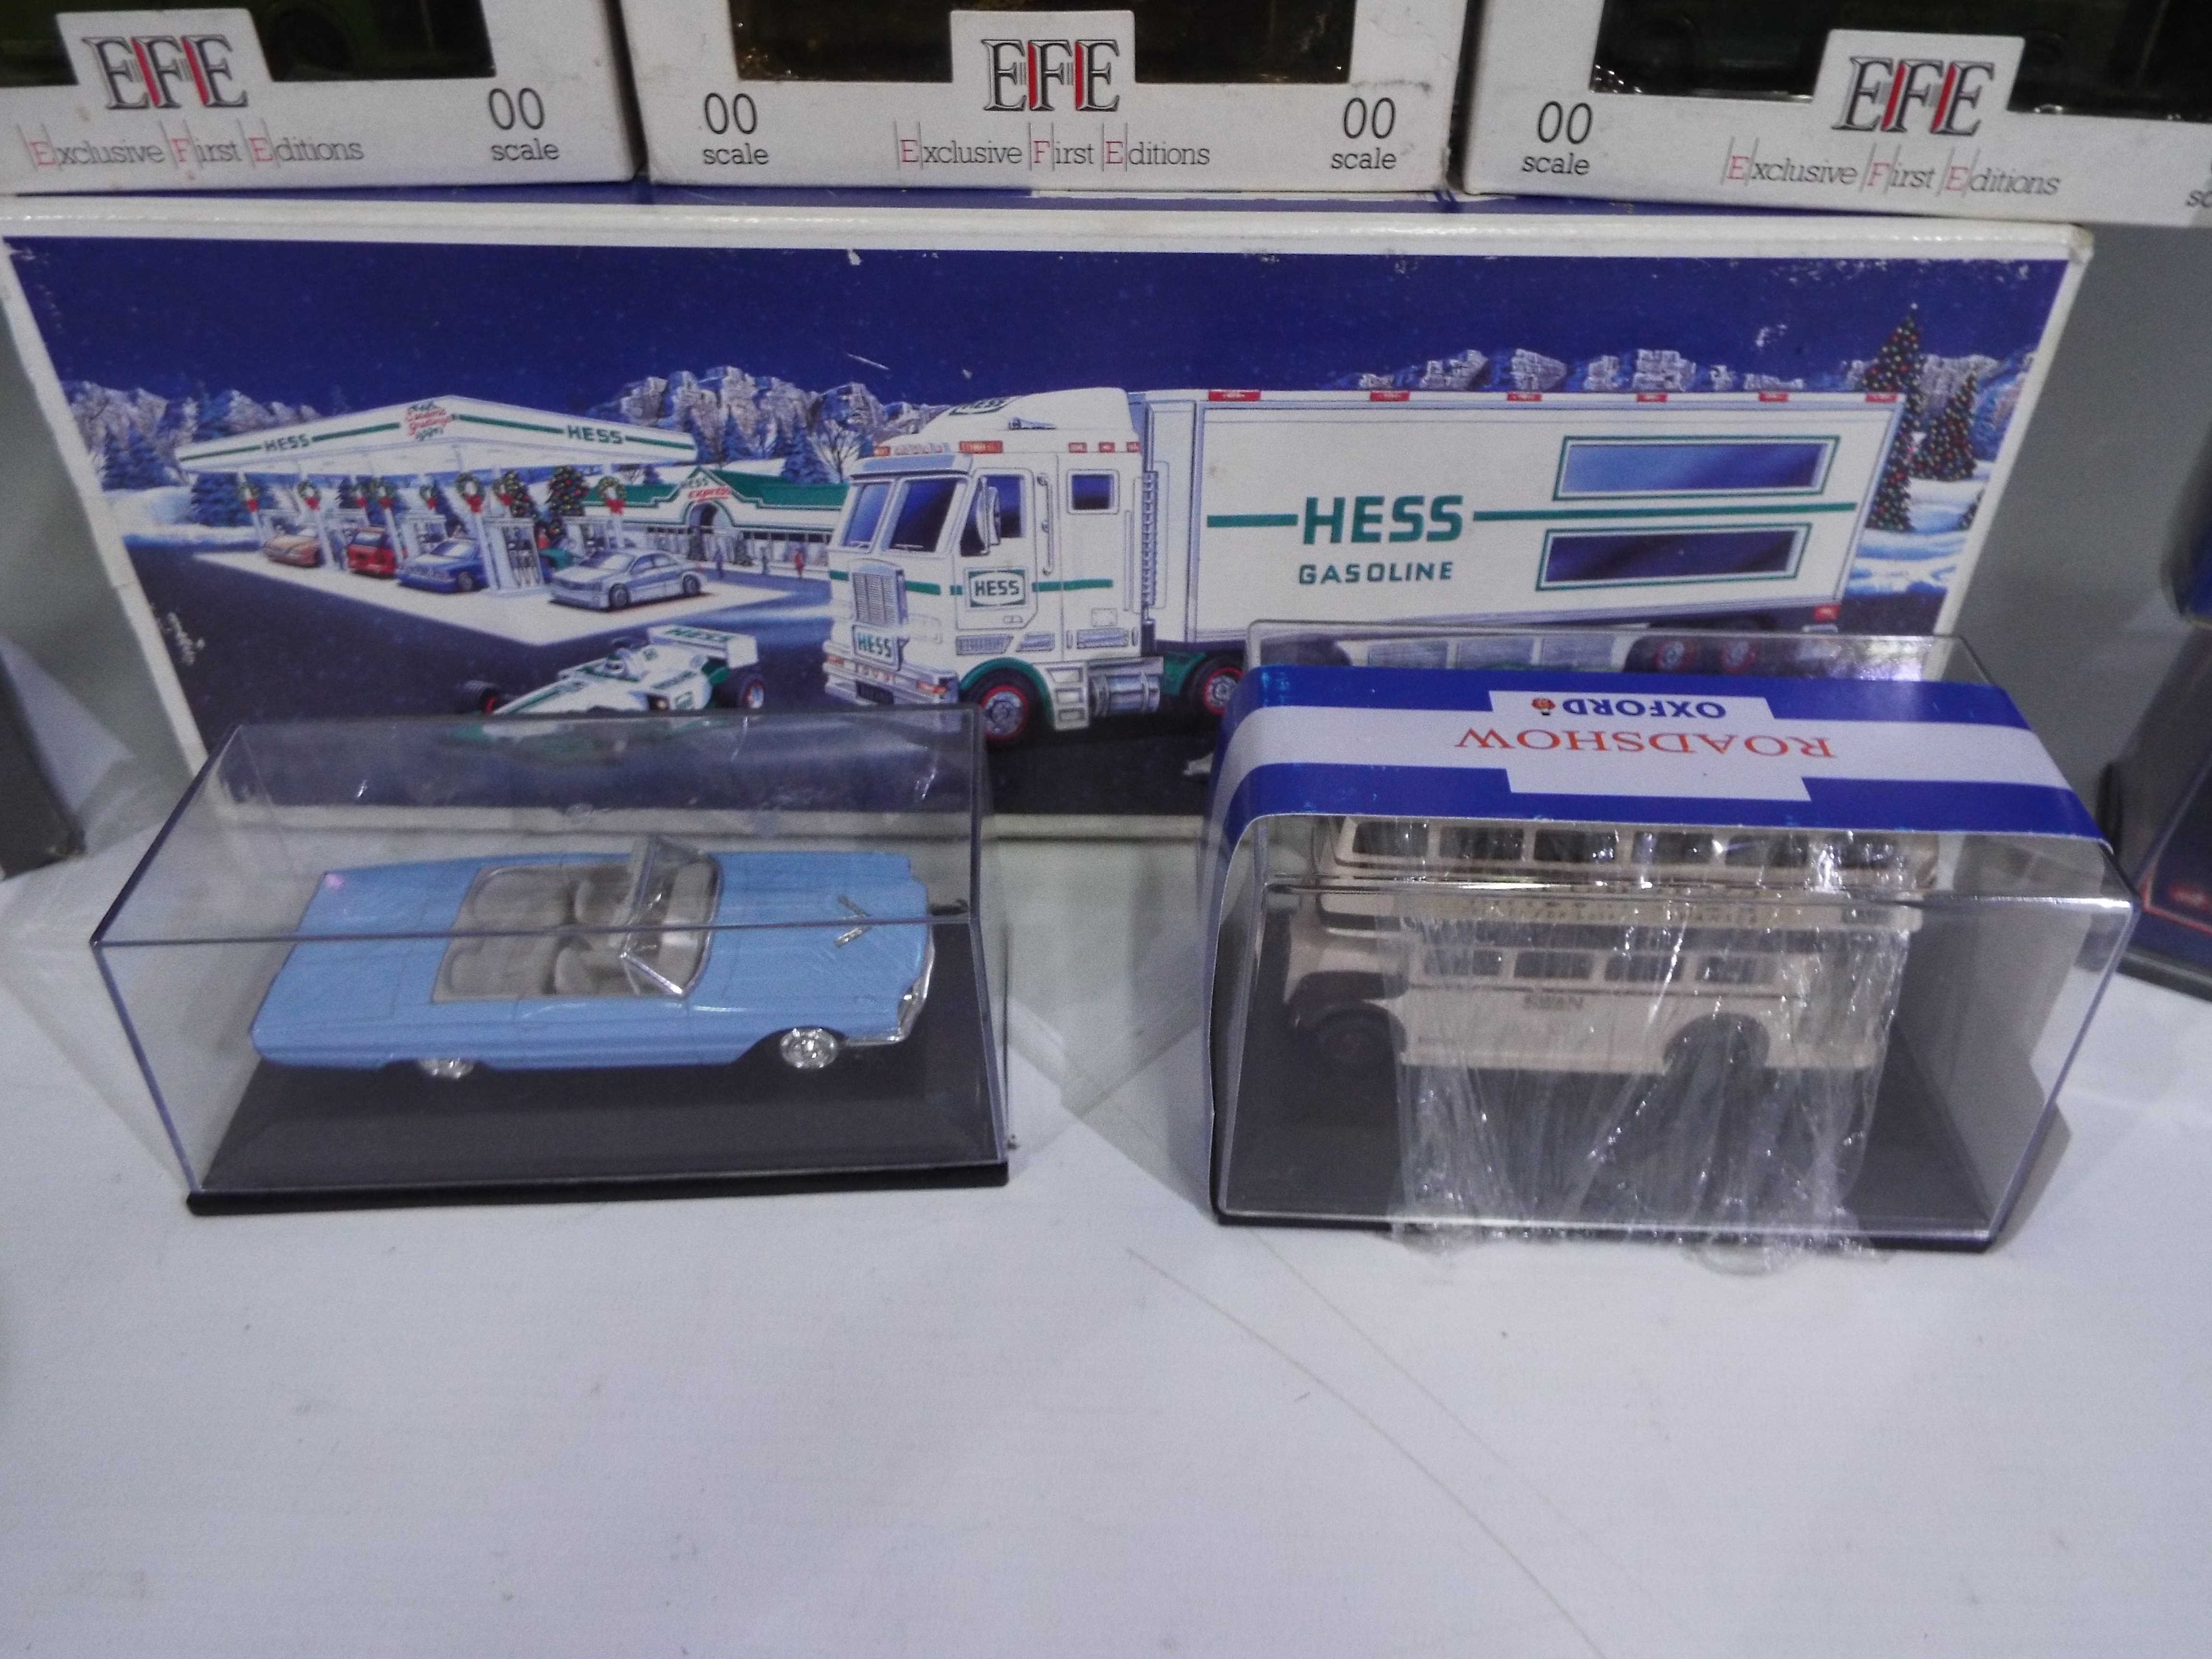 Hess, Vanguards, Corgi, EFE - 18 boxed diecast and plastic vehicles in various scales. - Image 3 of 6